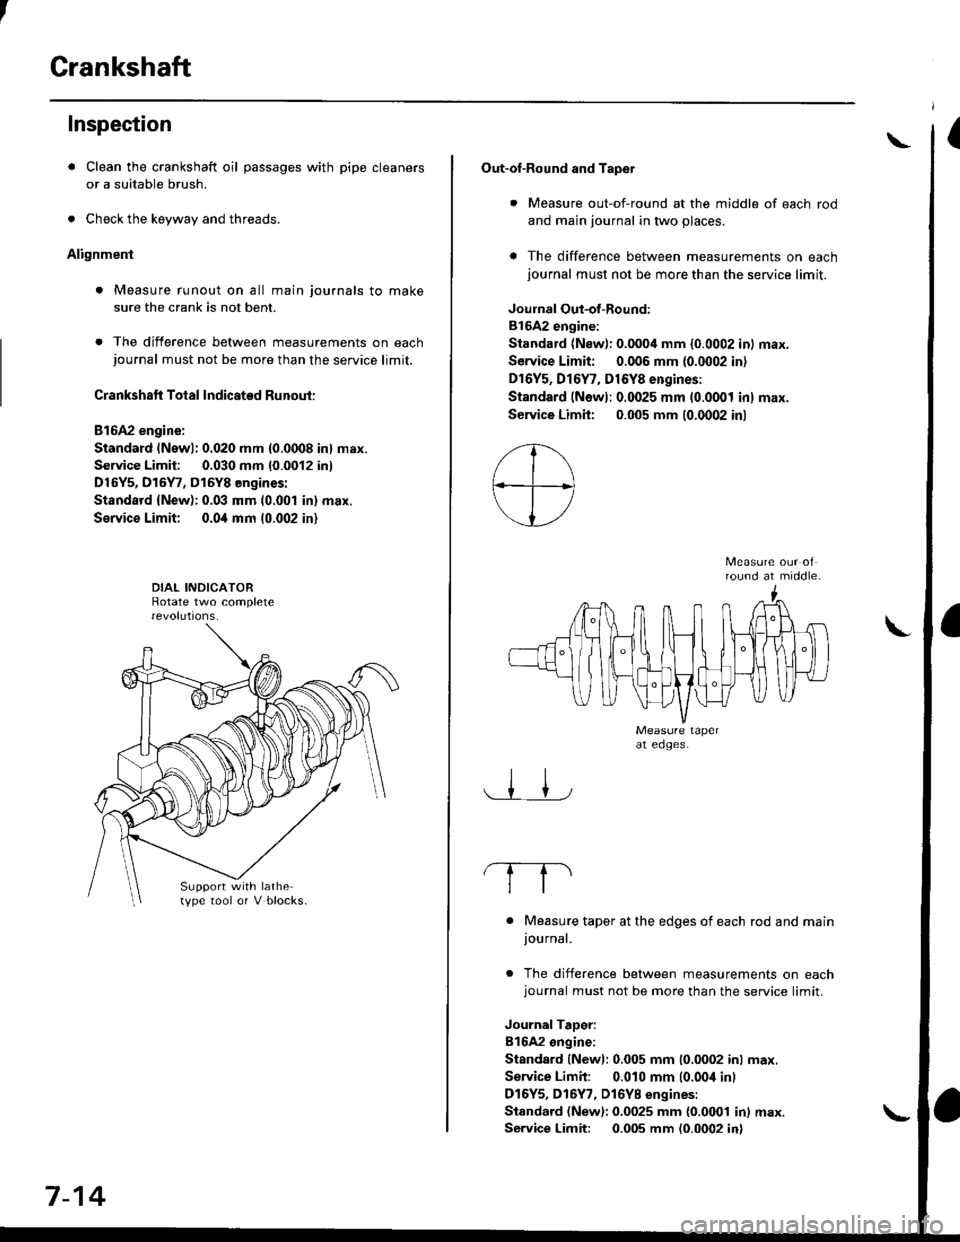 HONDA CIVIC 1997 6.G Workshop Manual Crankshaft
Inspection
. Clean the crankshaft oil passages with pipe cleaners
or a suitable brush.
. Check the keyway and threads.
Alignment
. Measure runout on all main journals to make
sure the crank